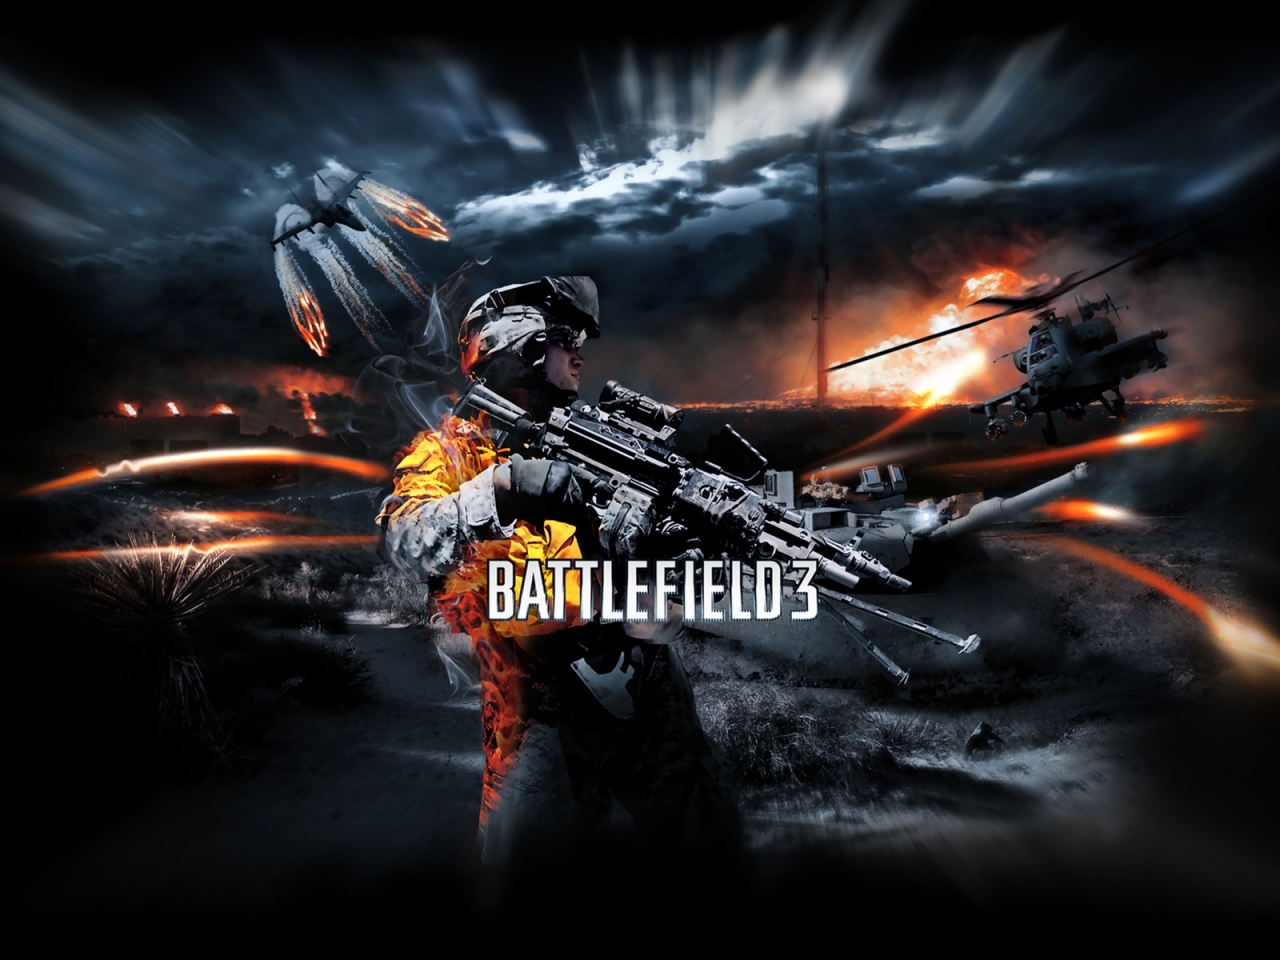 Battlefield 3 Poster for 1280 x 960 resolution